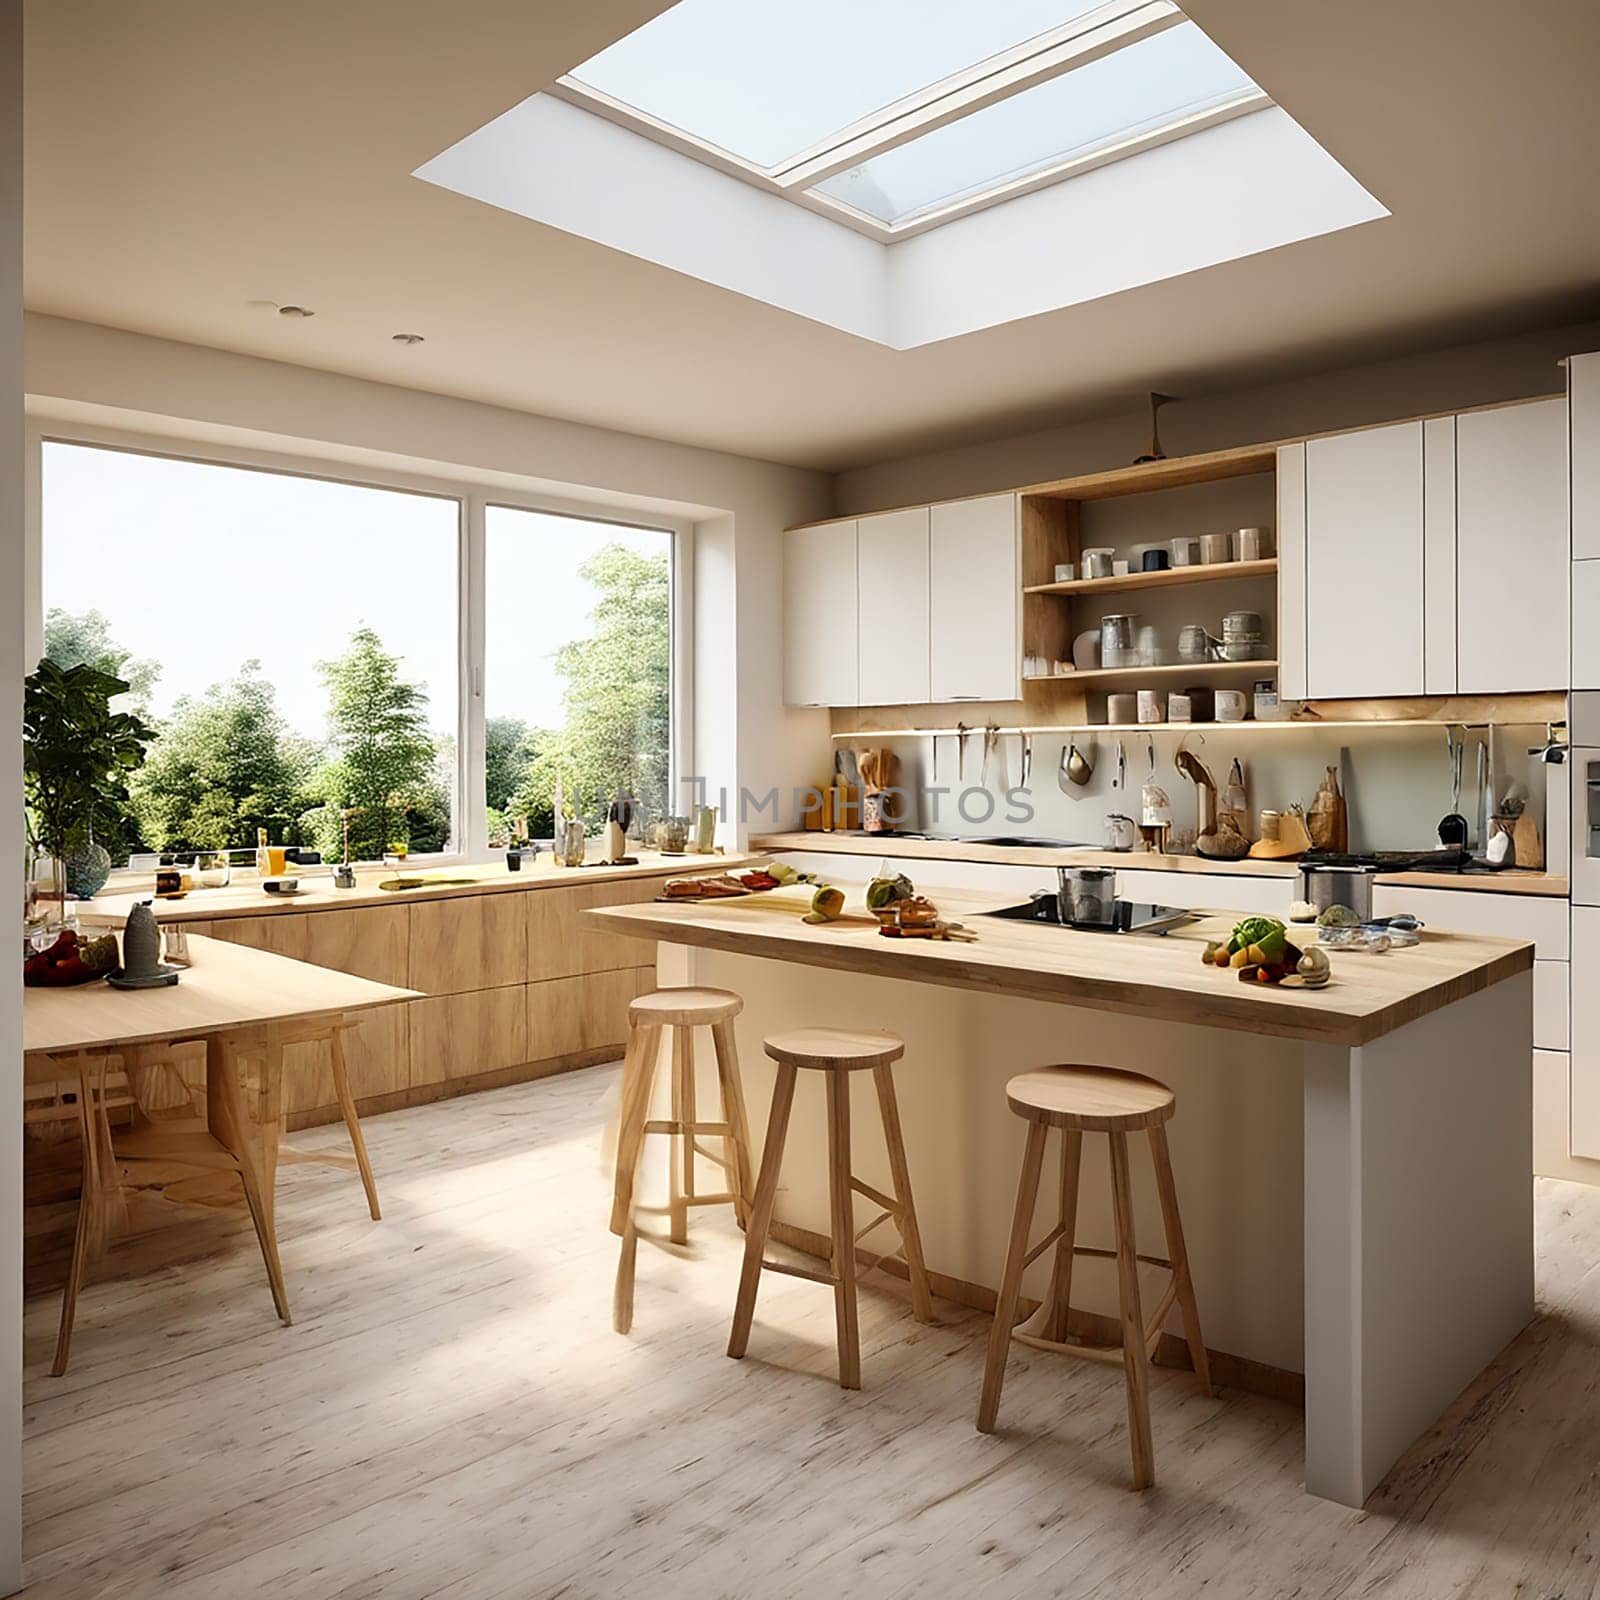 The Refined Kitchen: Designing a Space that Exudes Sophistication and Taste by Petrichor